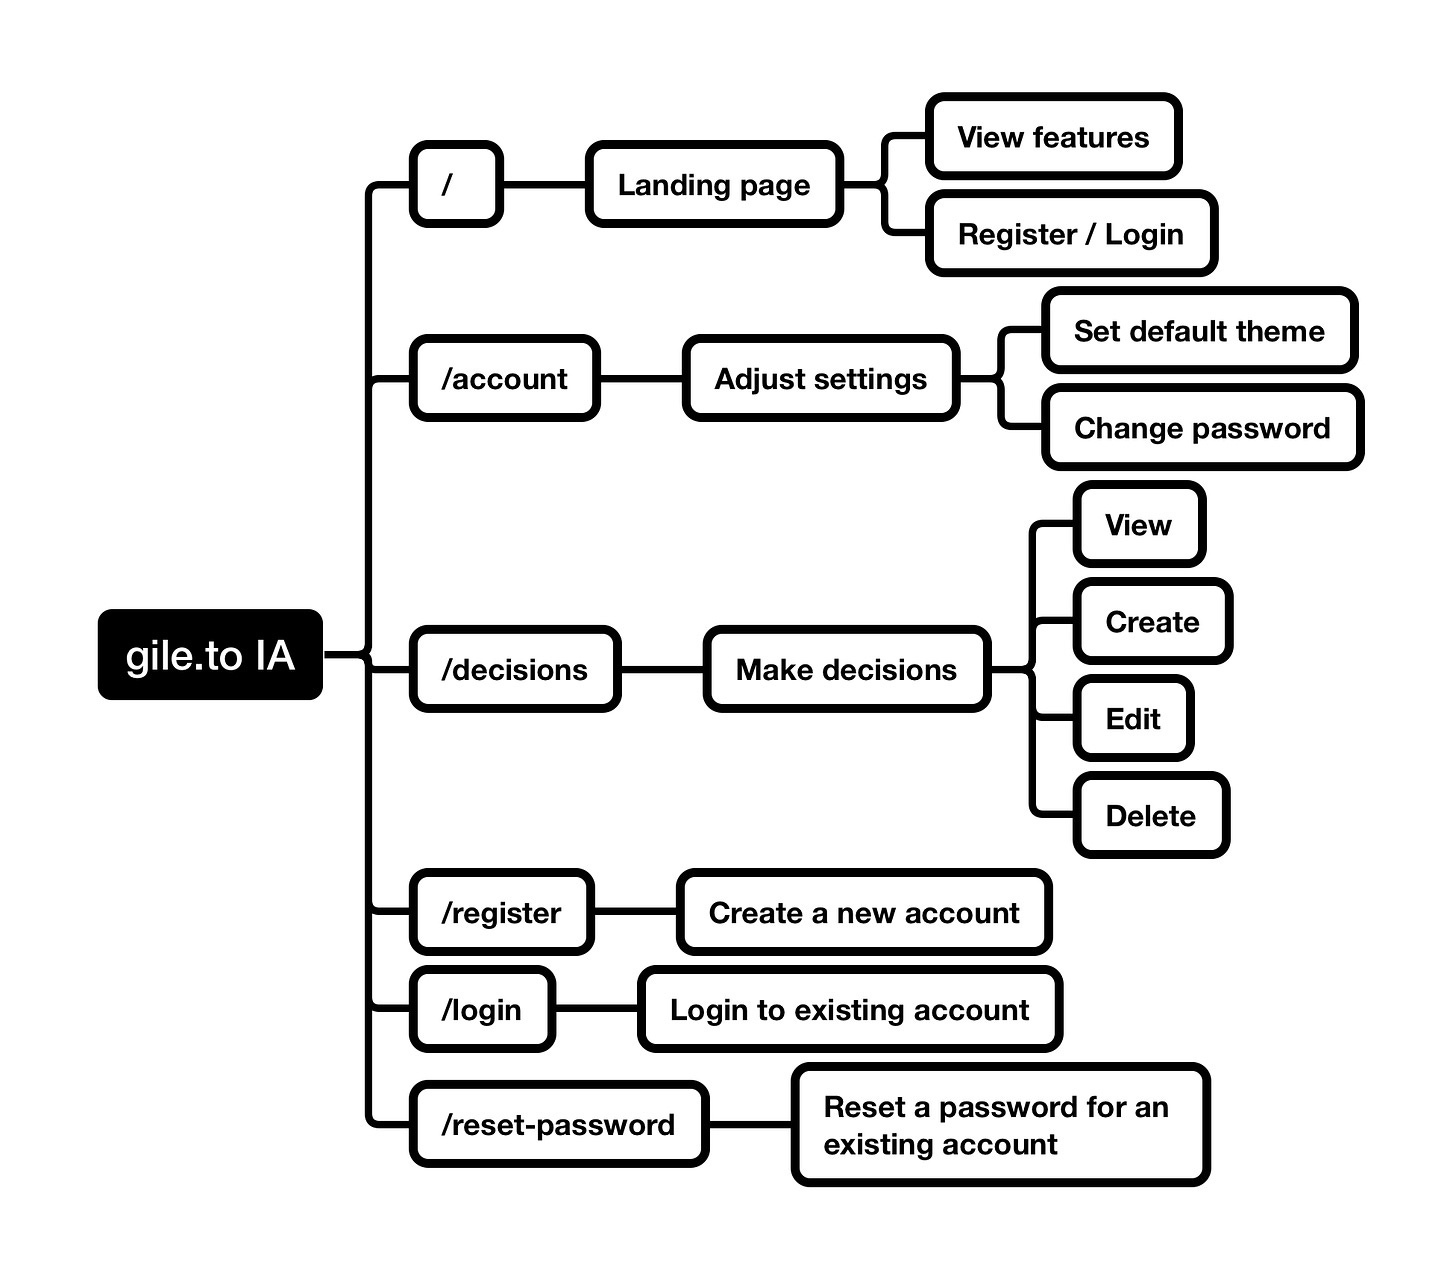 gile.to informational architecture